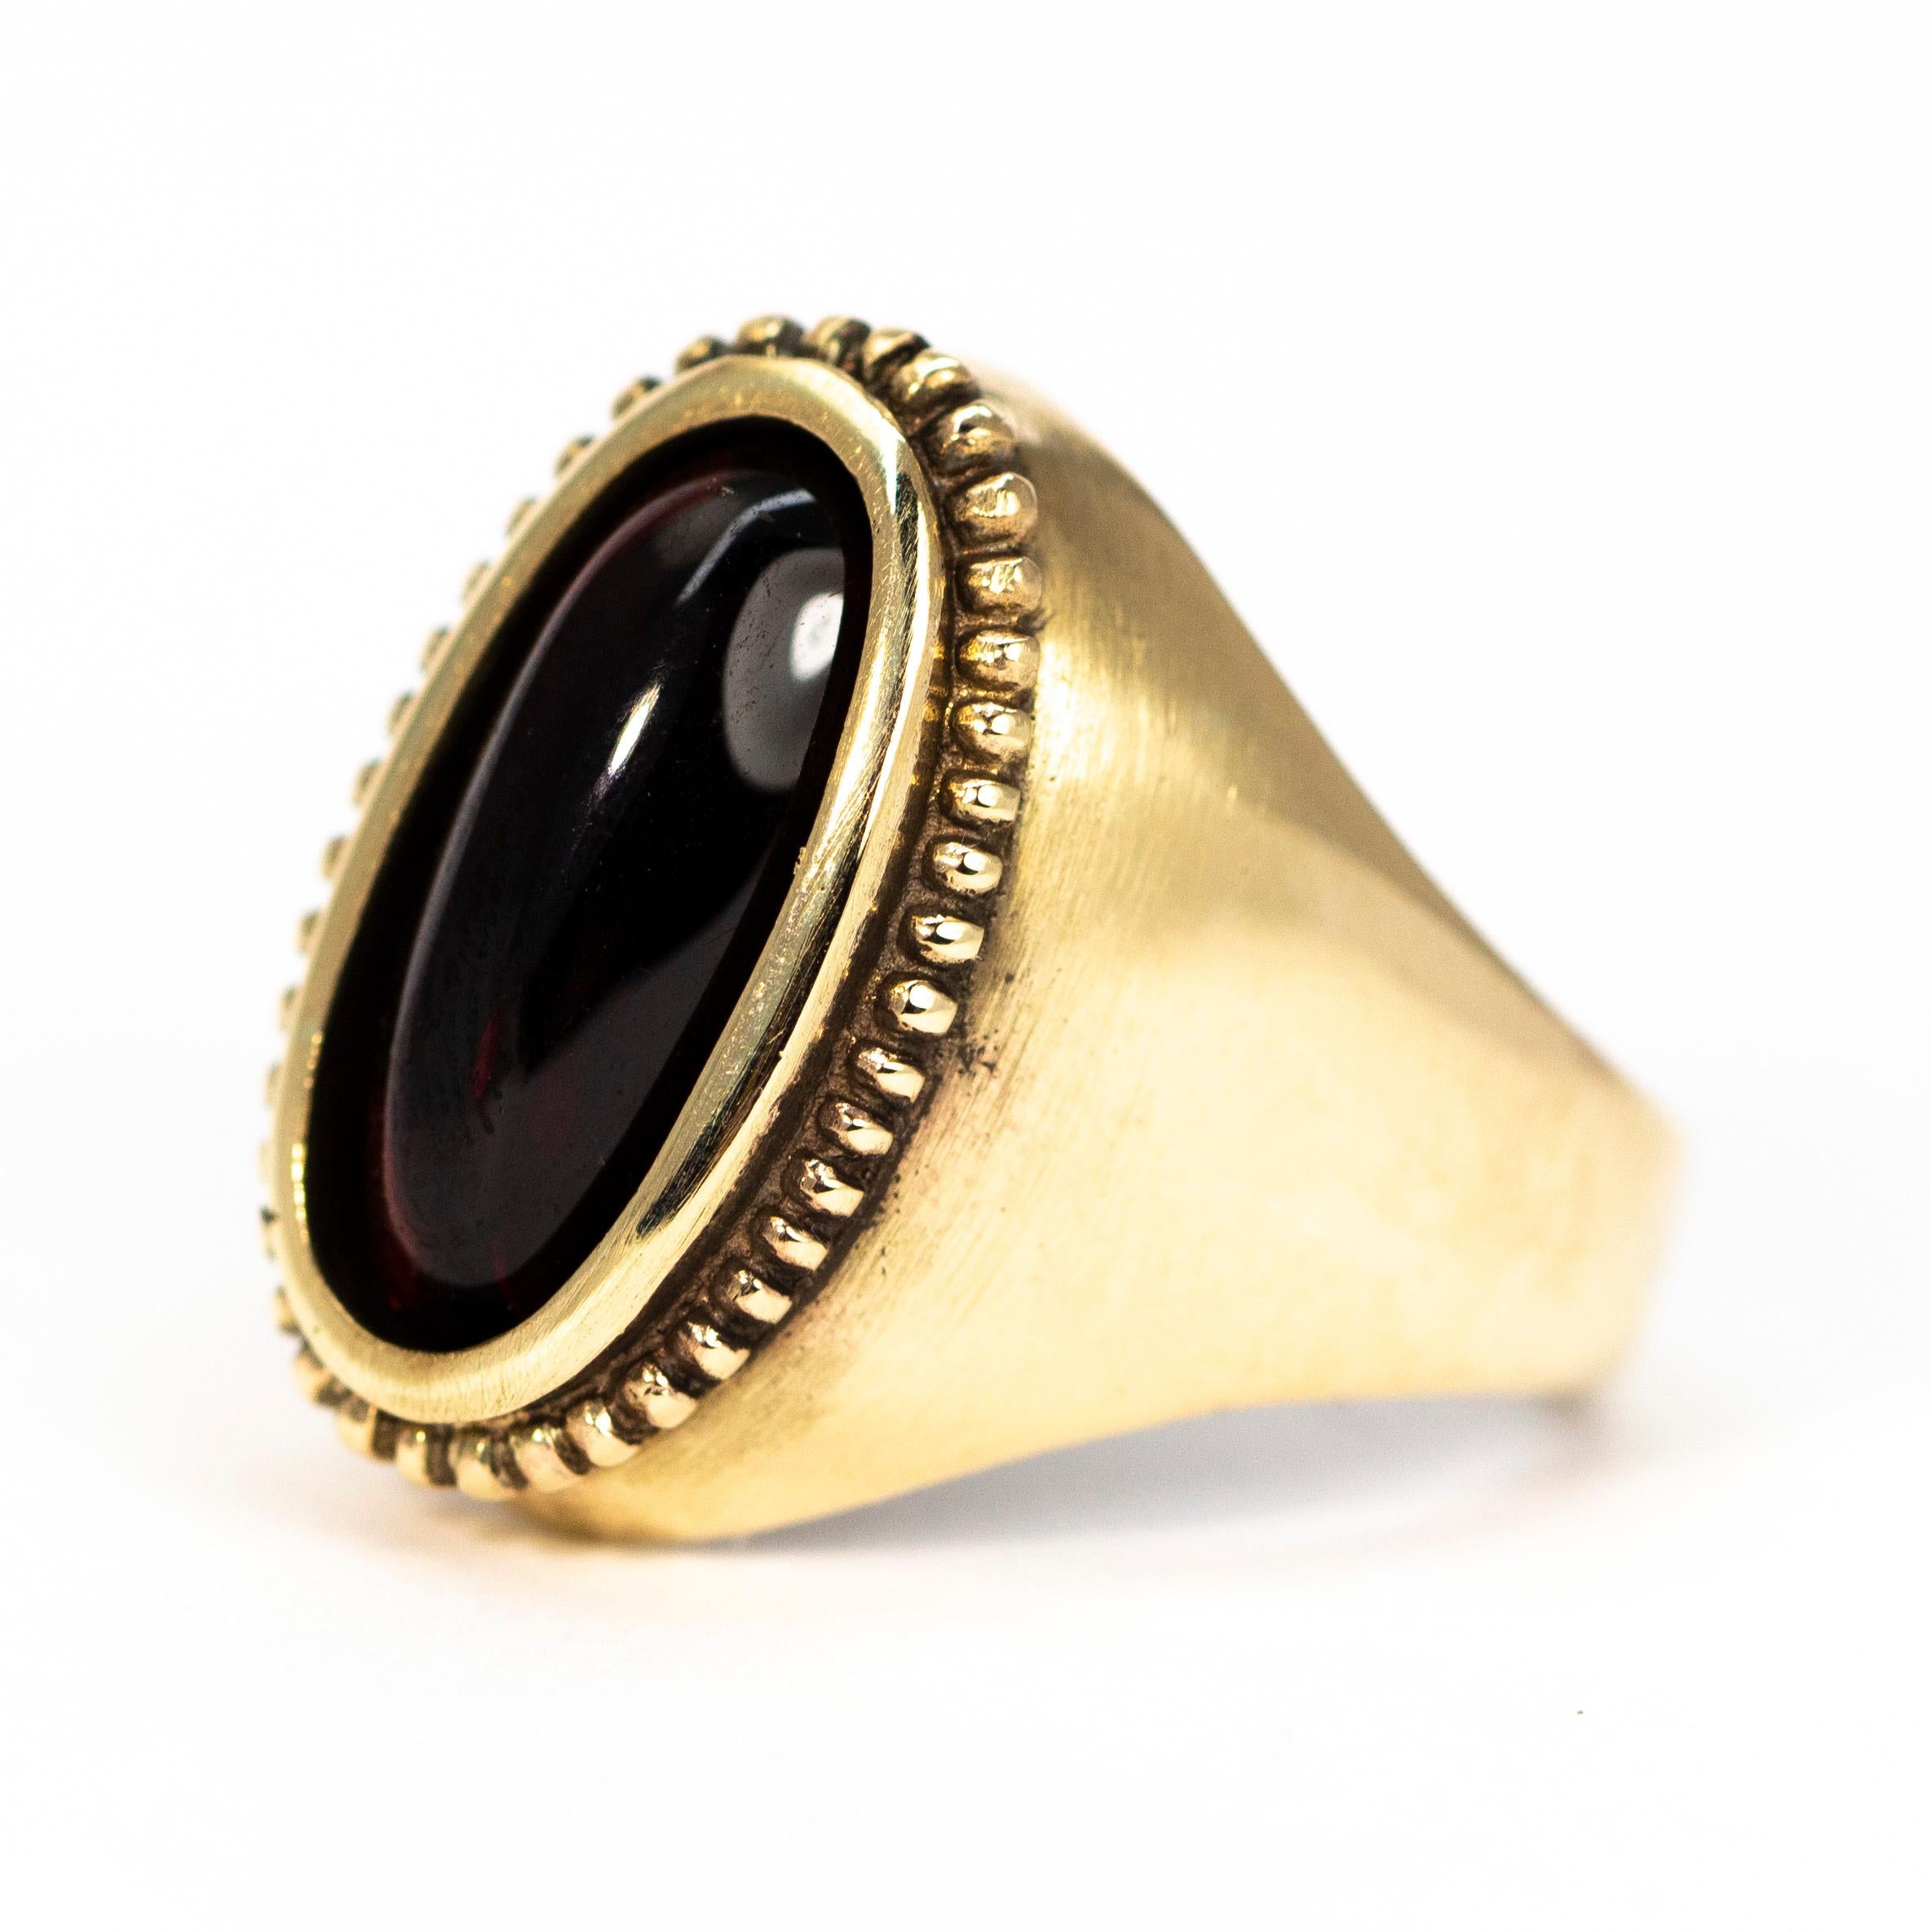 This glossy garnet stone is so smooth and beautiful and is sat in a dot detailed setting and is modelled in 9ct gold. 

Ring Size: M 1/2 or 6 1/2
Stone Dimensions: 14 x 6mm 

Weight:  7.5g